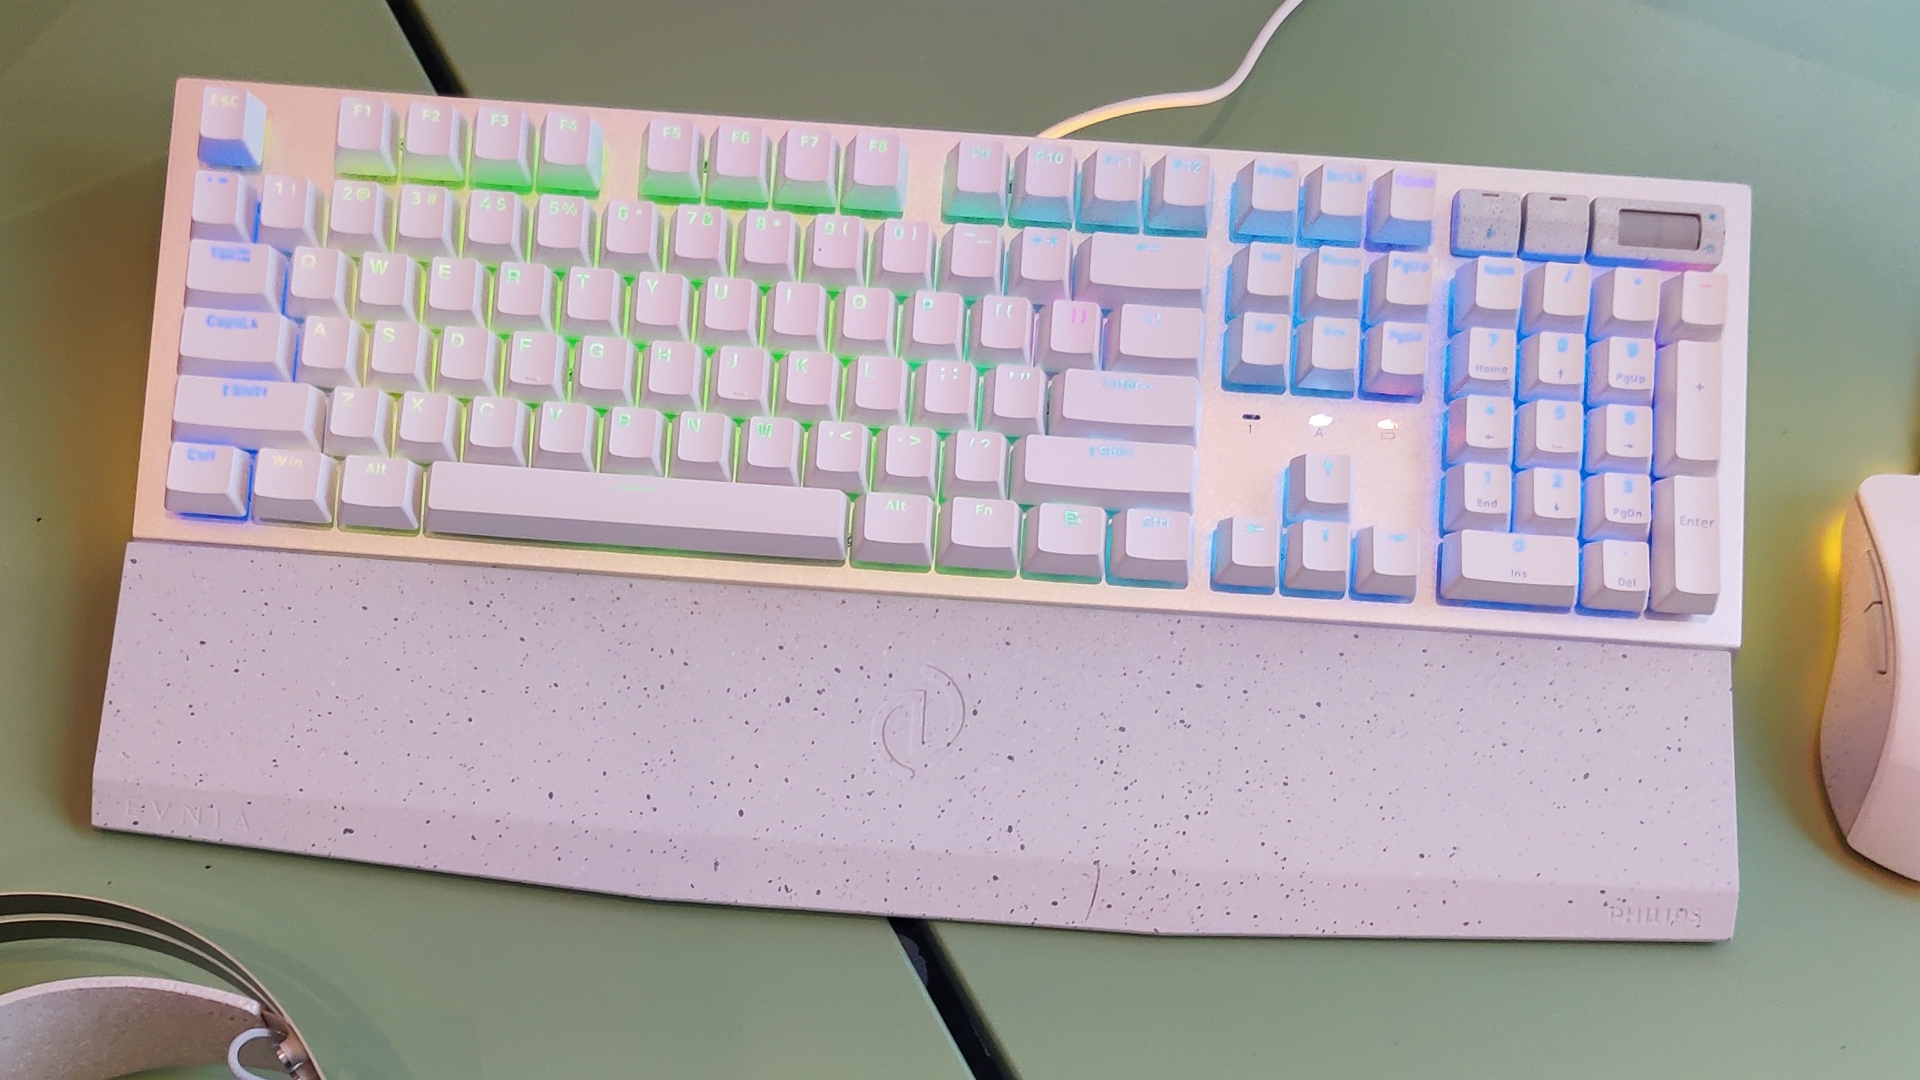 The high end Philips Evnia gaming keyboard close up